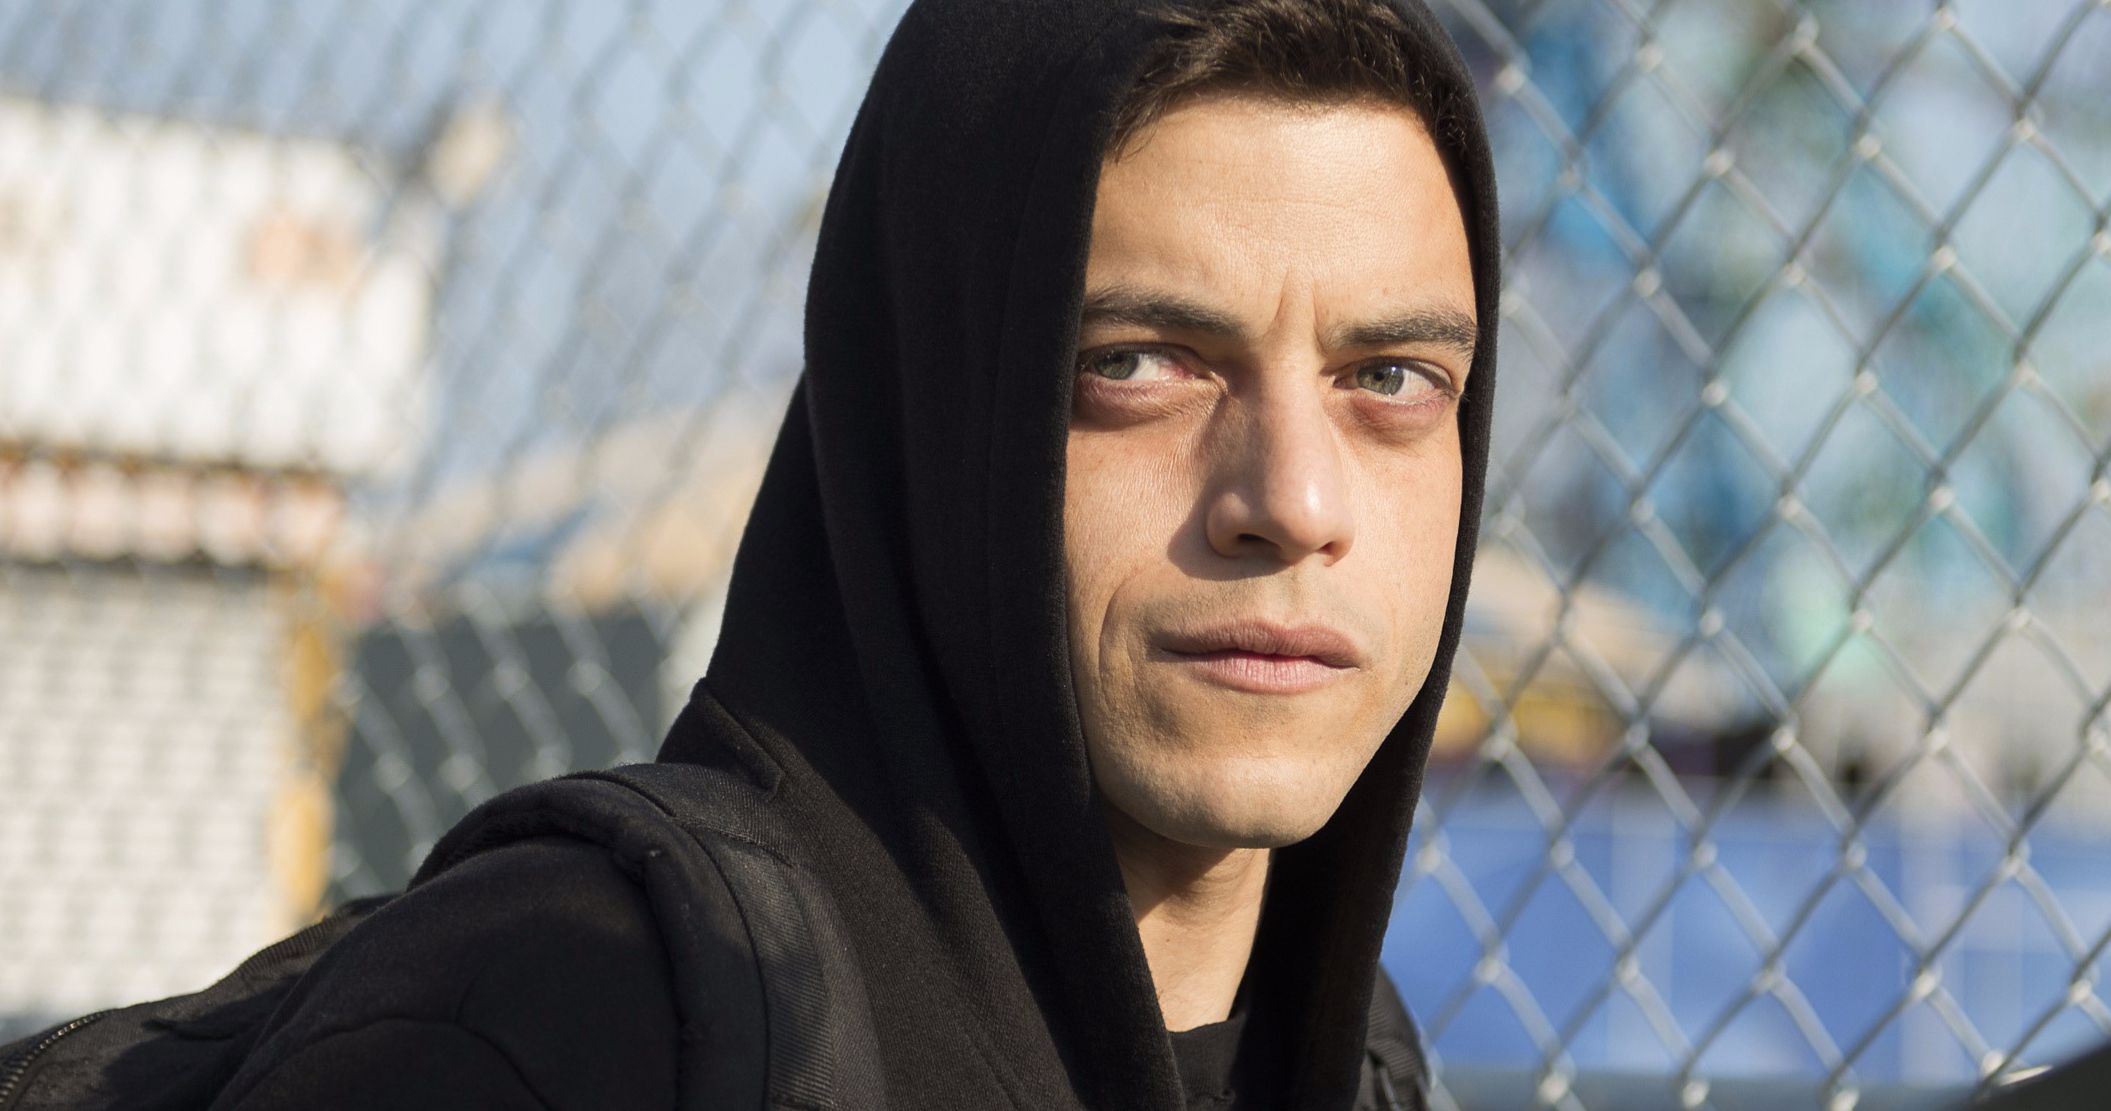 Rami Malek Refused to Let His Bond 25 Villain Be Motivated by Religion